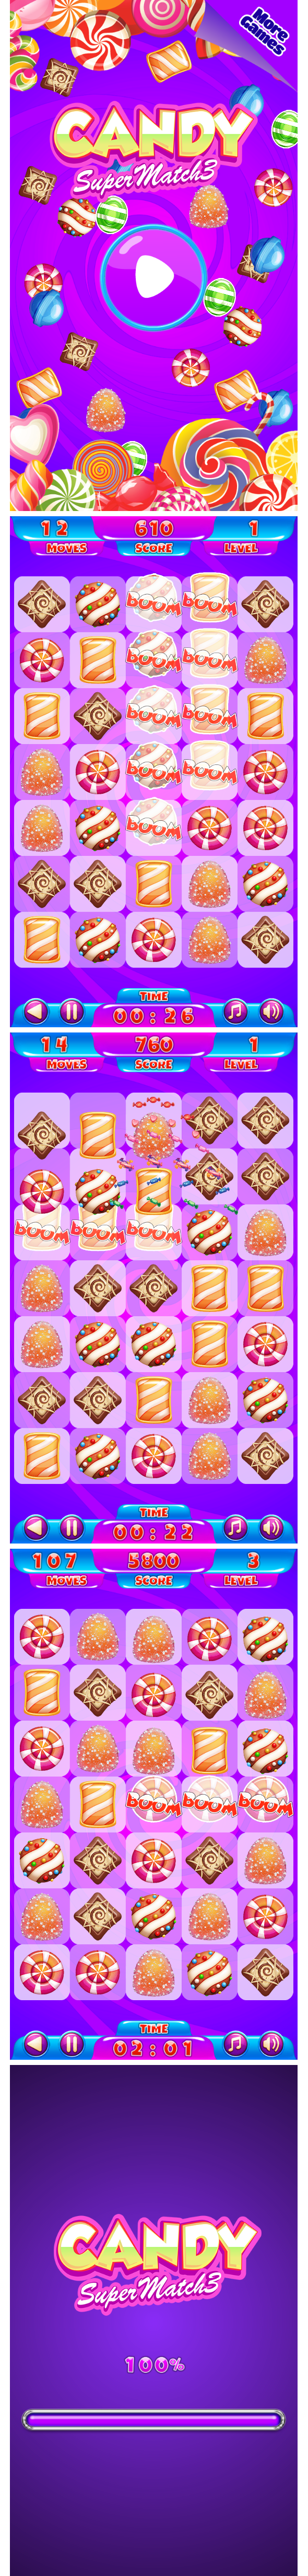 Candy Match3 - HTML5 Mobile Game (Construct 3 | Construct 2 | Capx) - 1